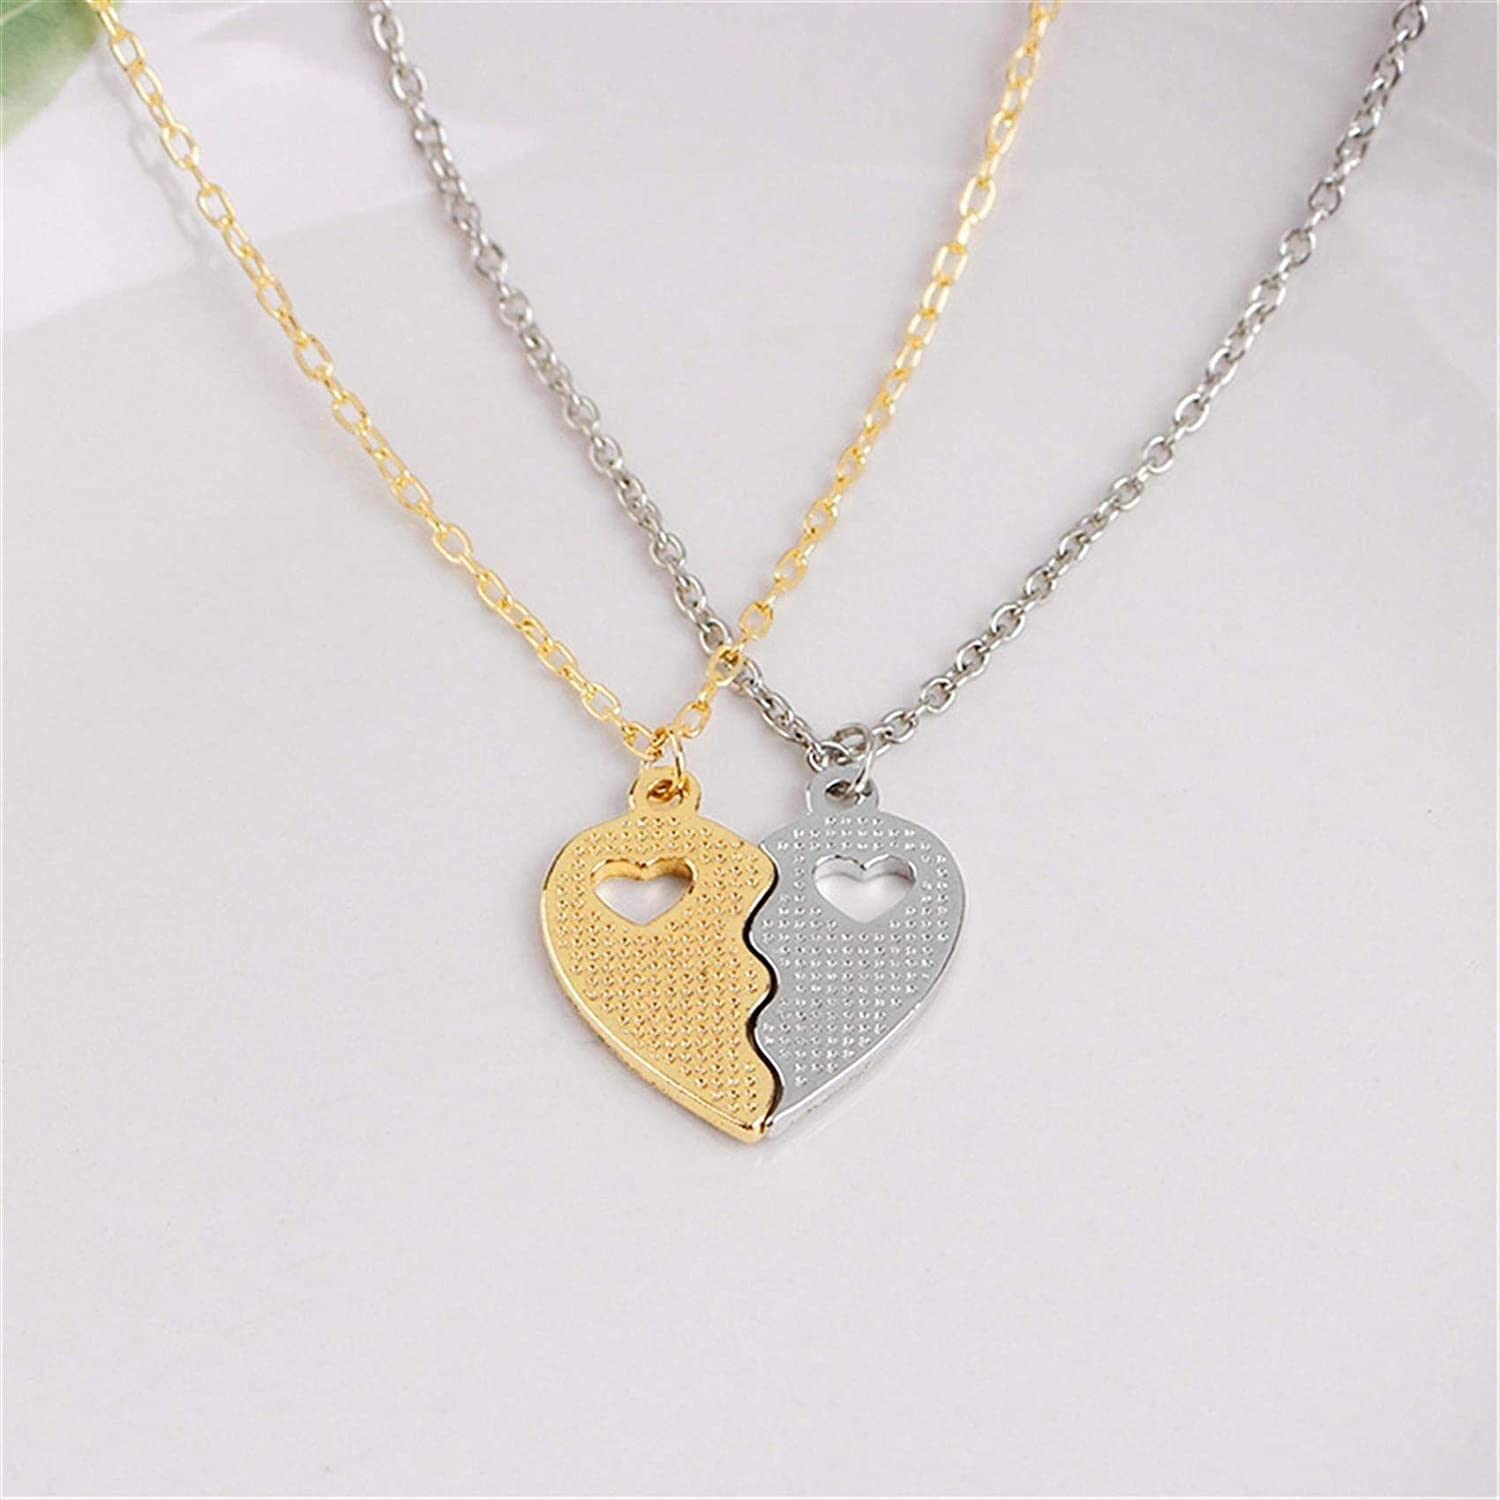 Heart Hollow Out Best Friends Engraved Pendant Friendship Necklace Set Of 2 Silver And Golden Dexterous and professional